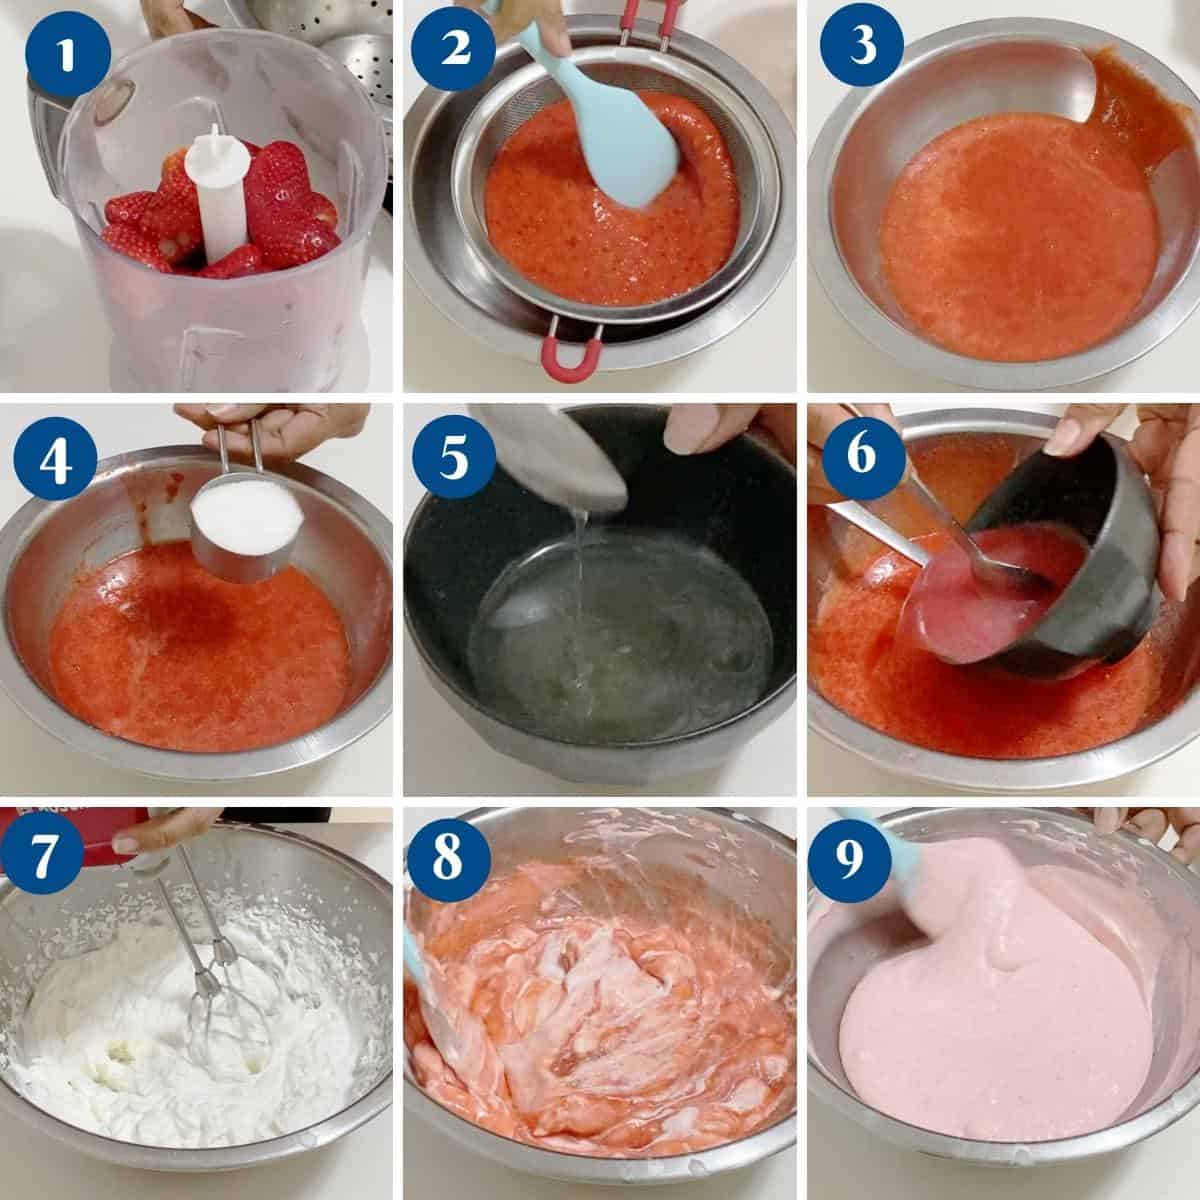 Progress pictures making the strawberry mousse.